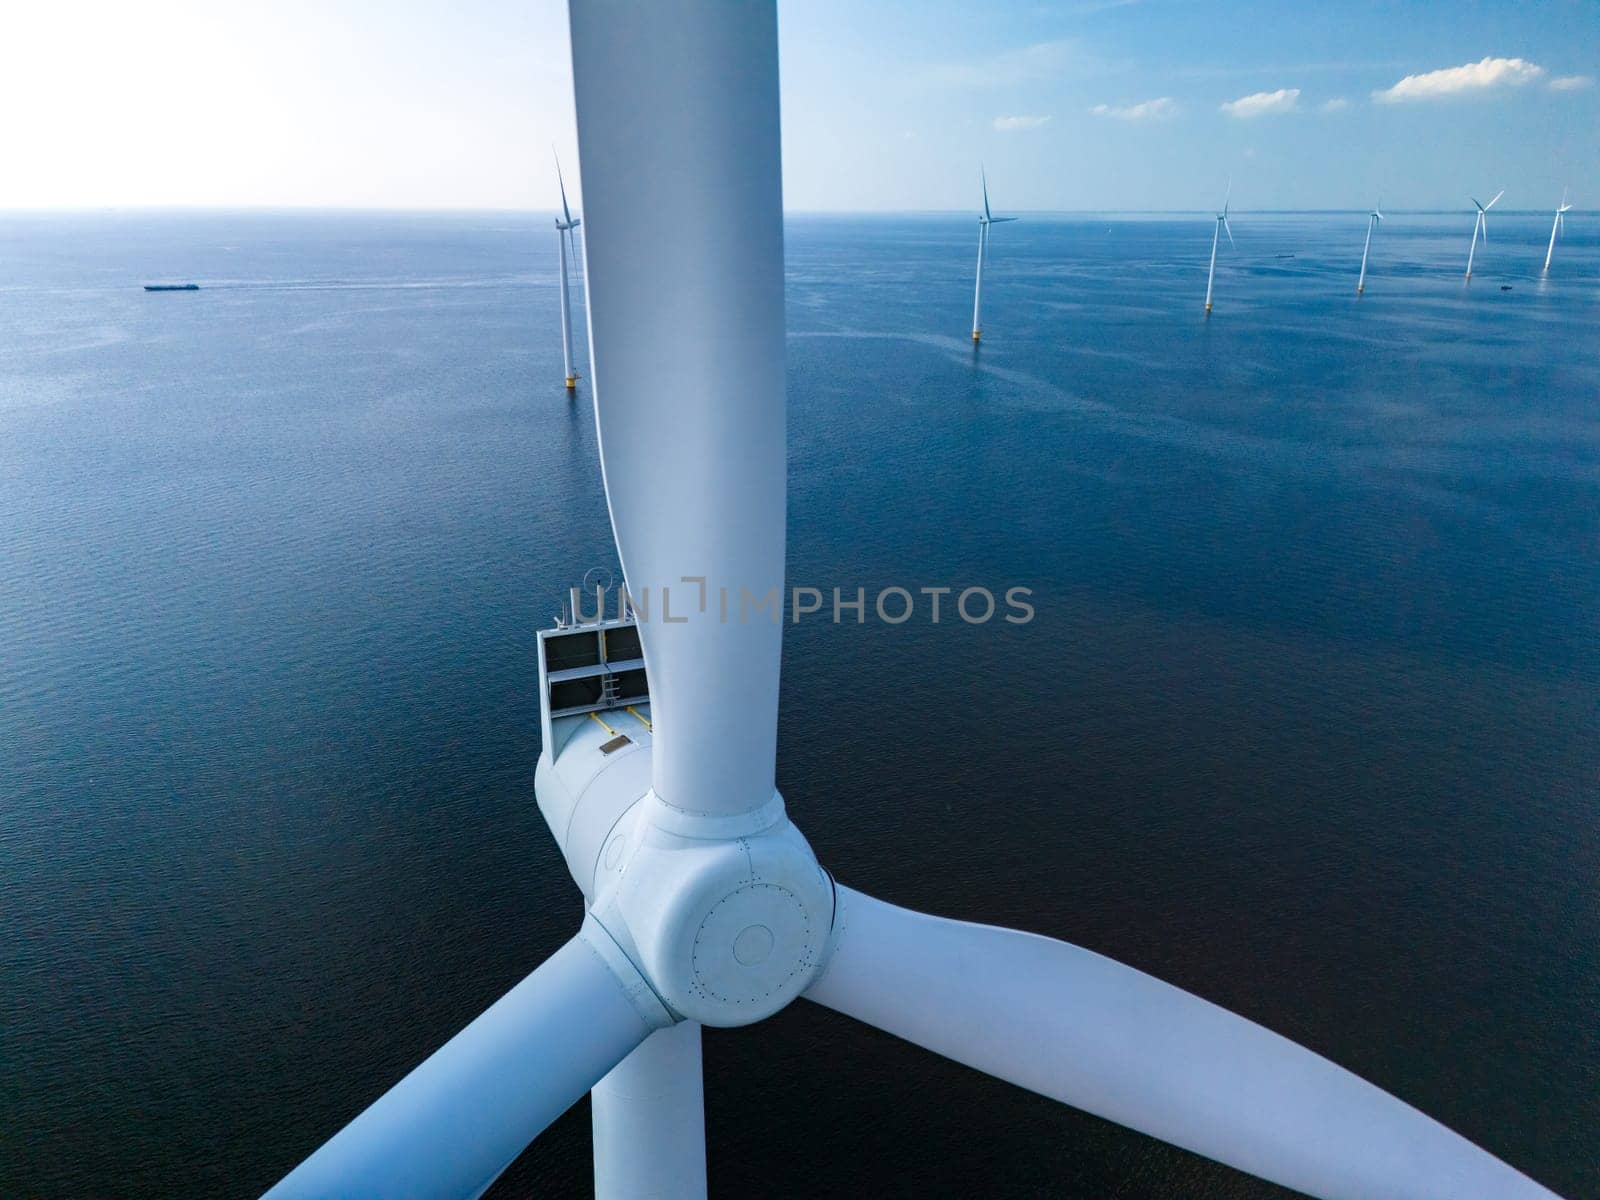 A majestic wind turbine stands tall in the middle of the ocean, harnessing the power of the wind to generate clean, sustainable energy for the surrounding area by fokkebok